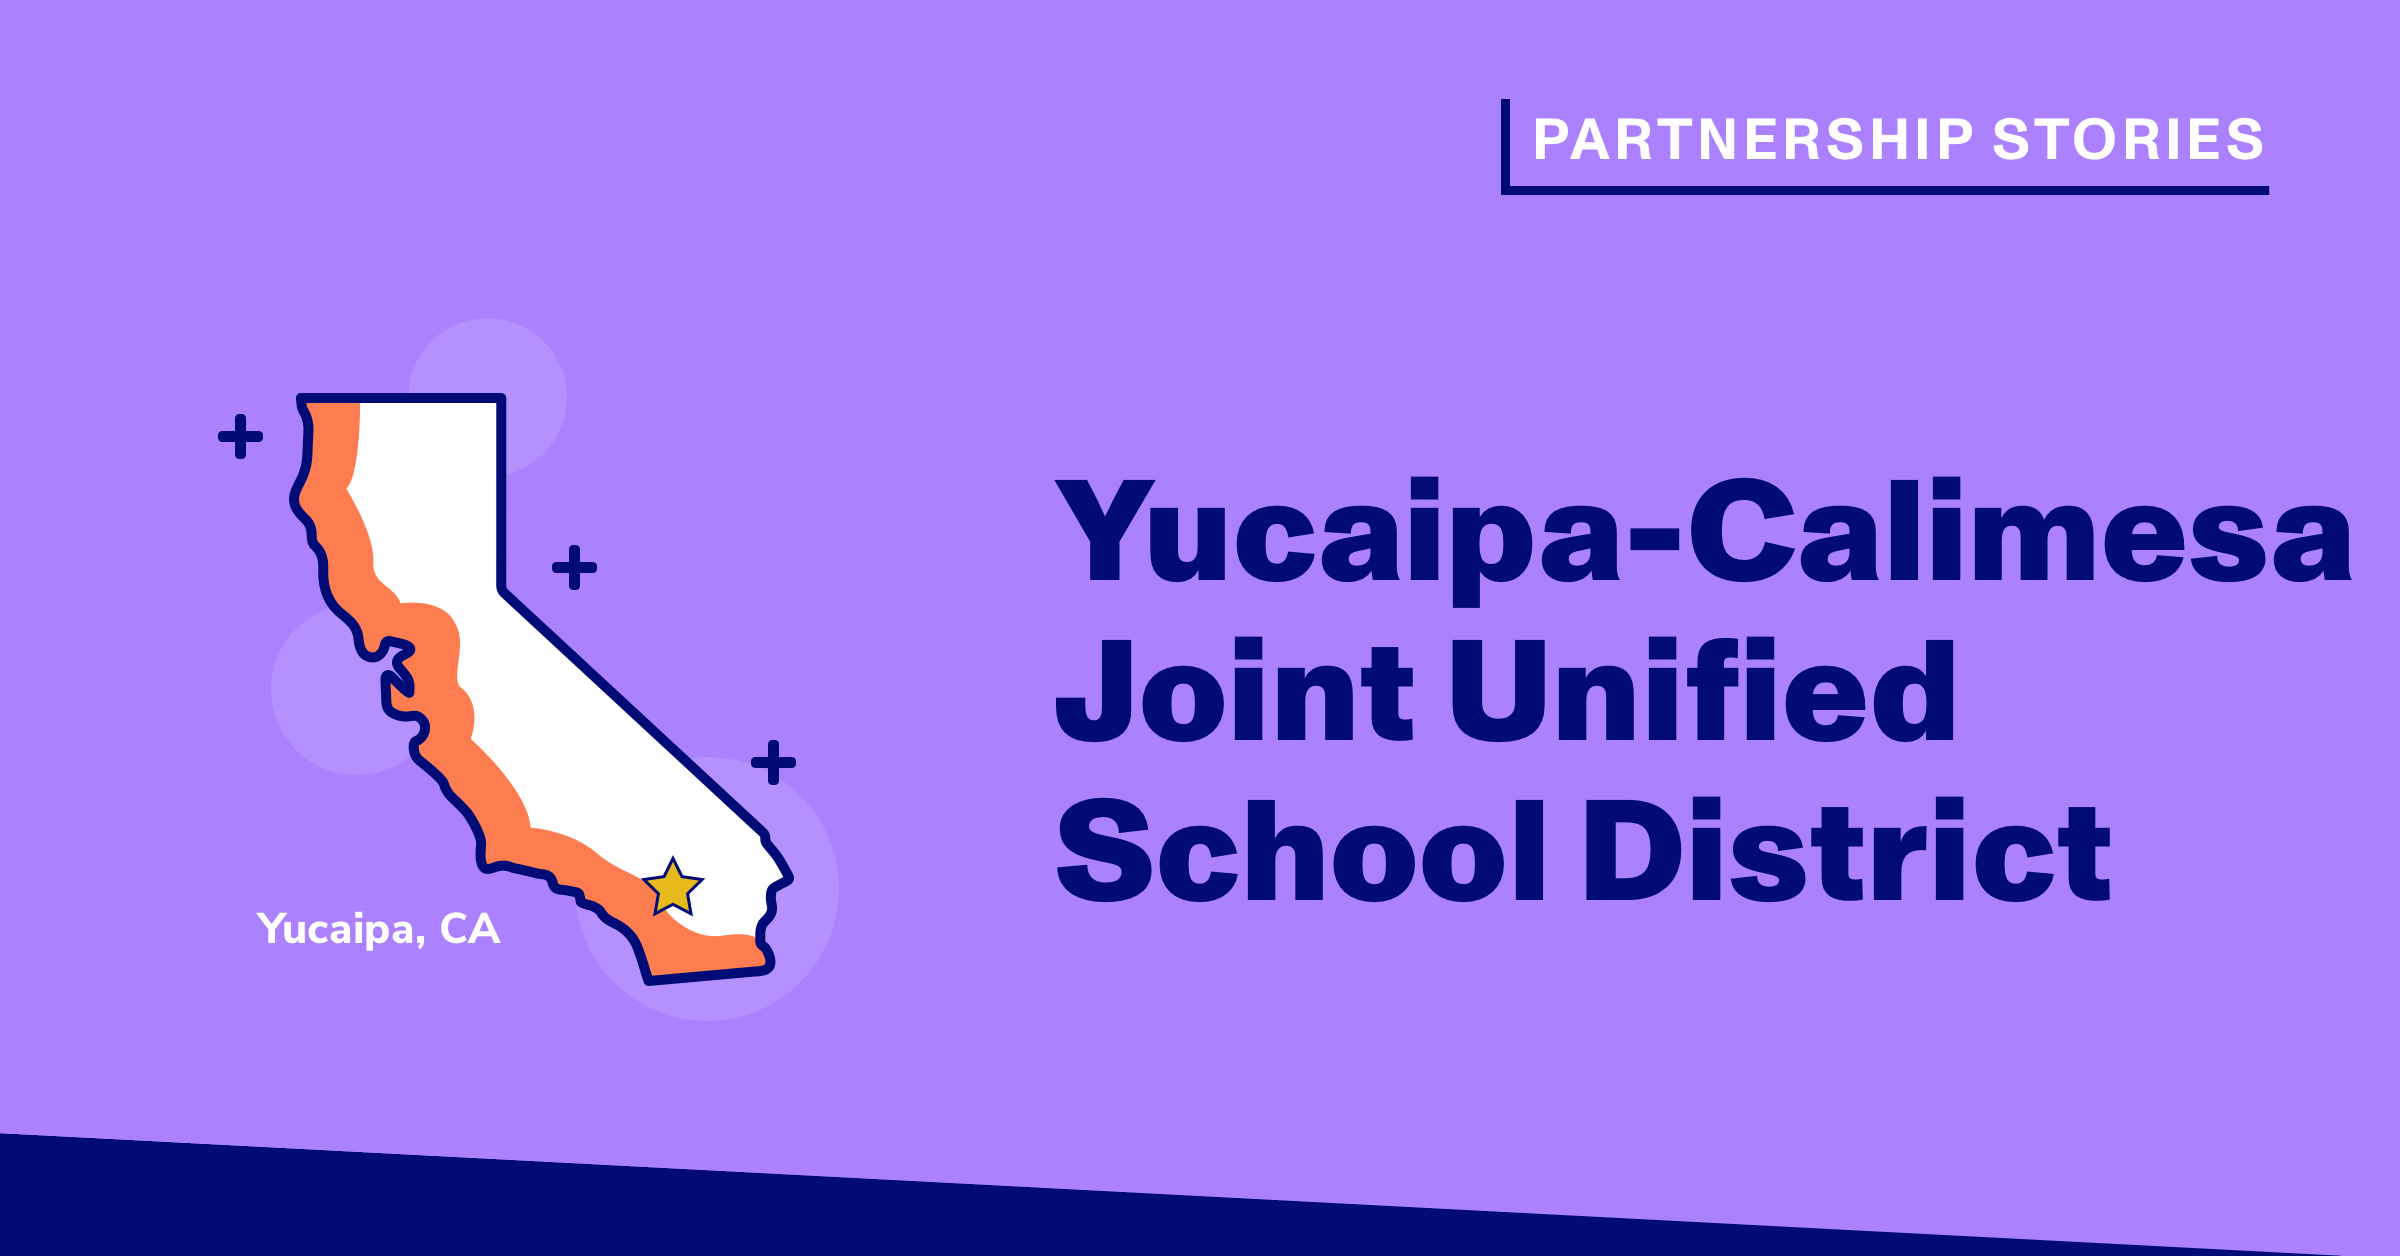 Yucaipa-Calimesa JUSD Chooses Paper to Bolster Support for Students and Teachers